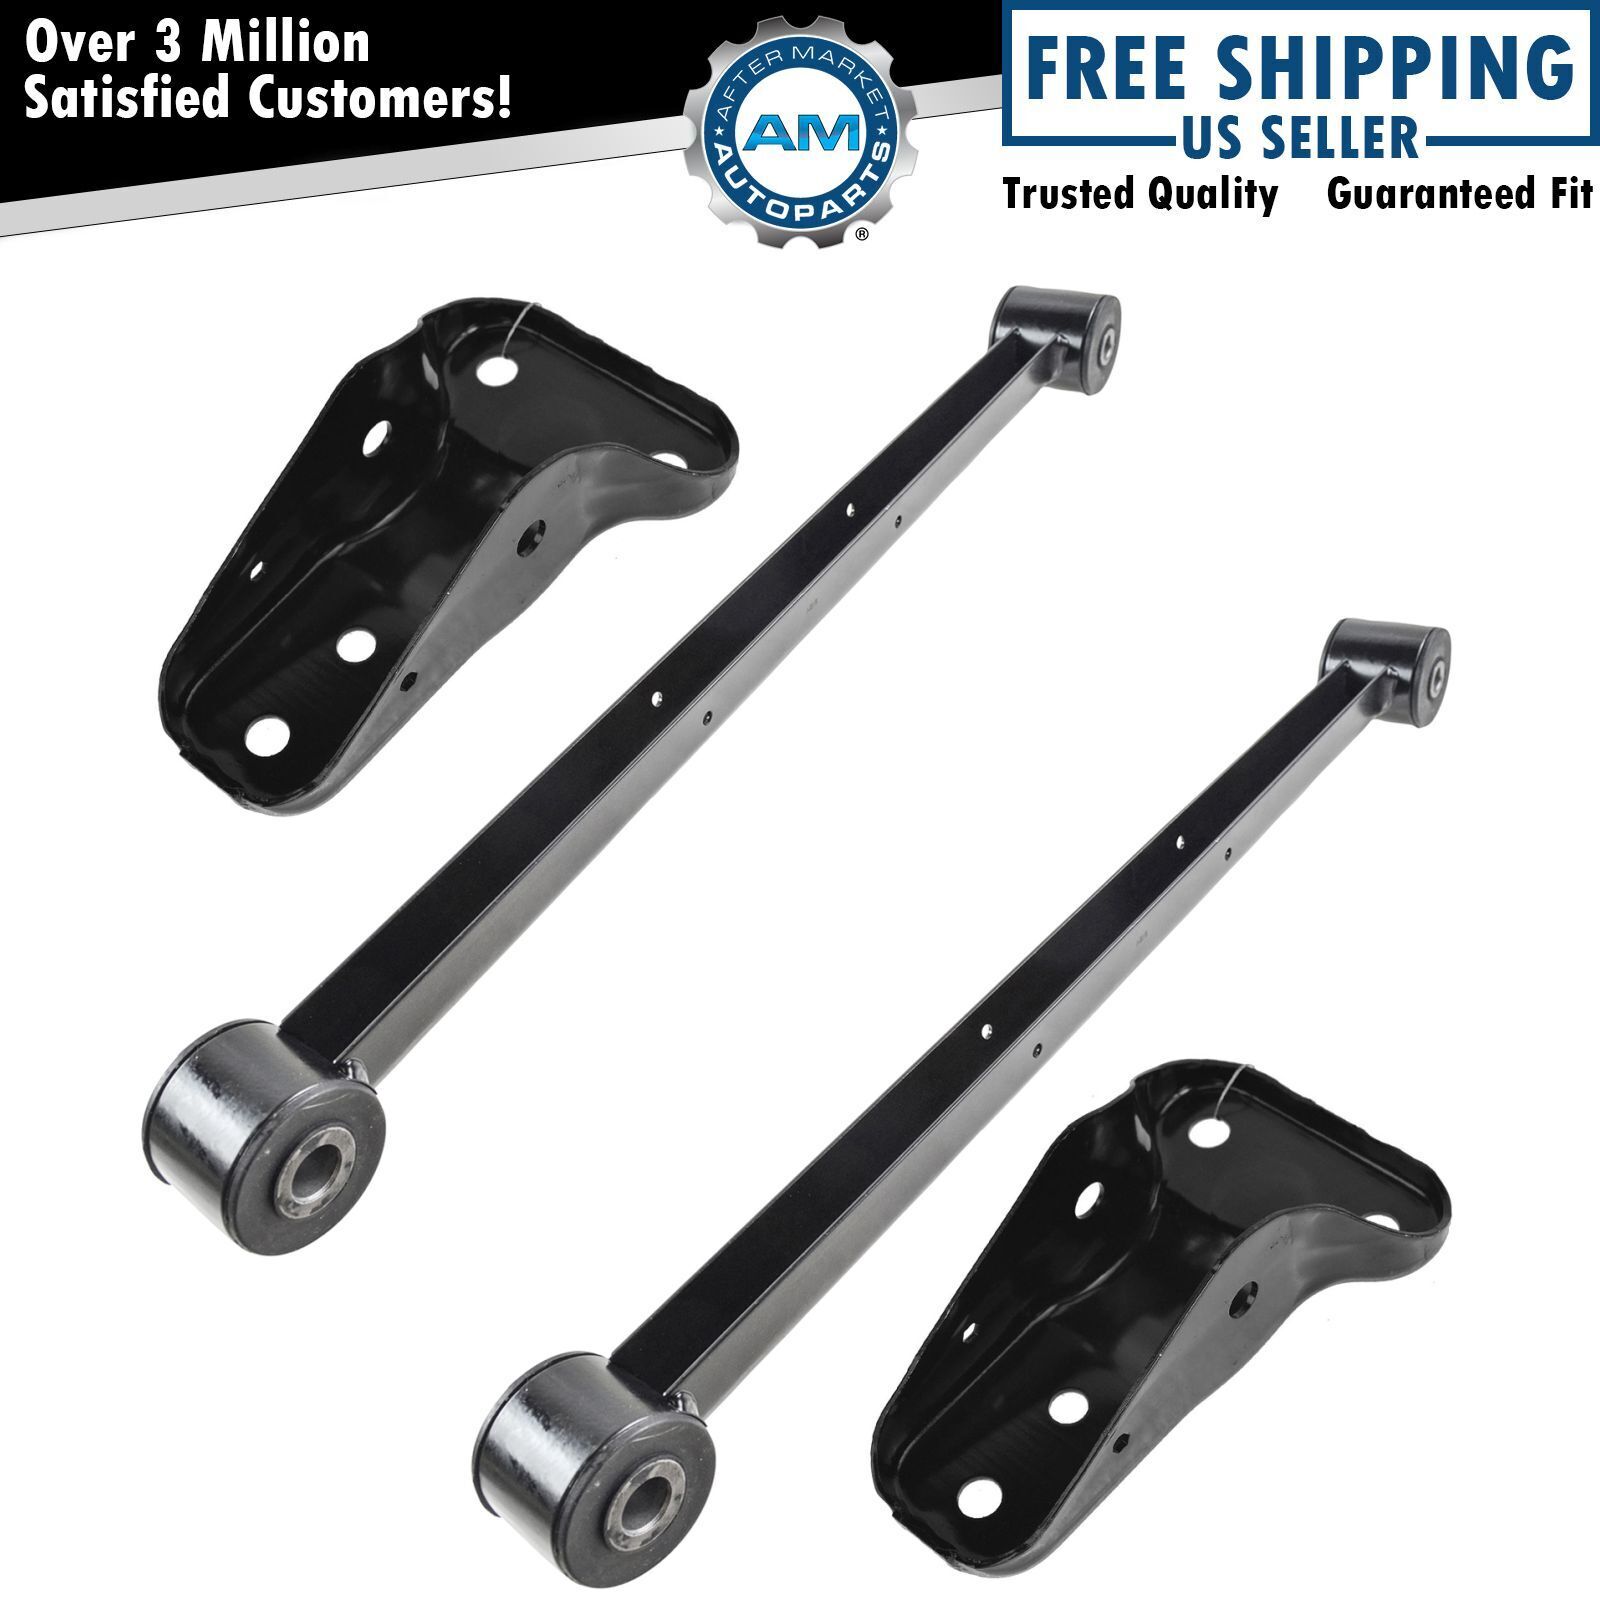 Trailing Arm & Bracket Rear Lower Set of 4 for Buick Chevy Oldsmobile Pontiac